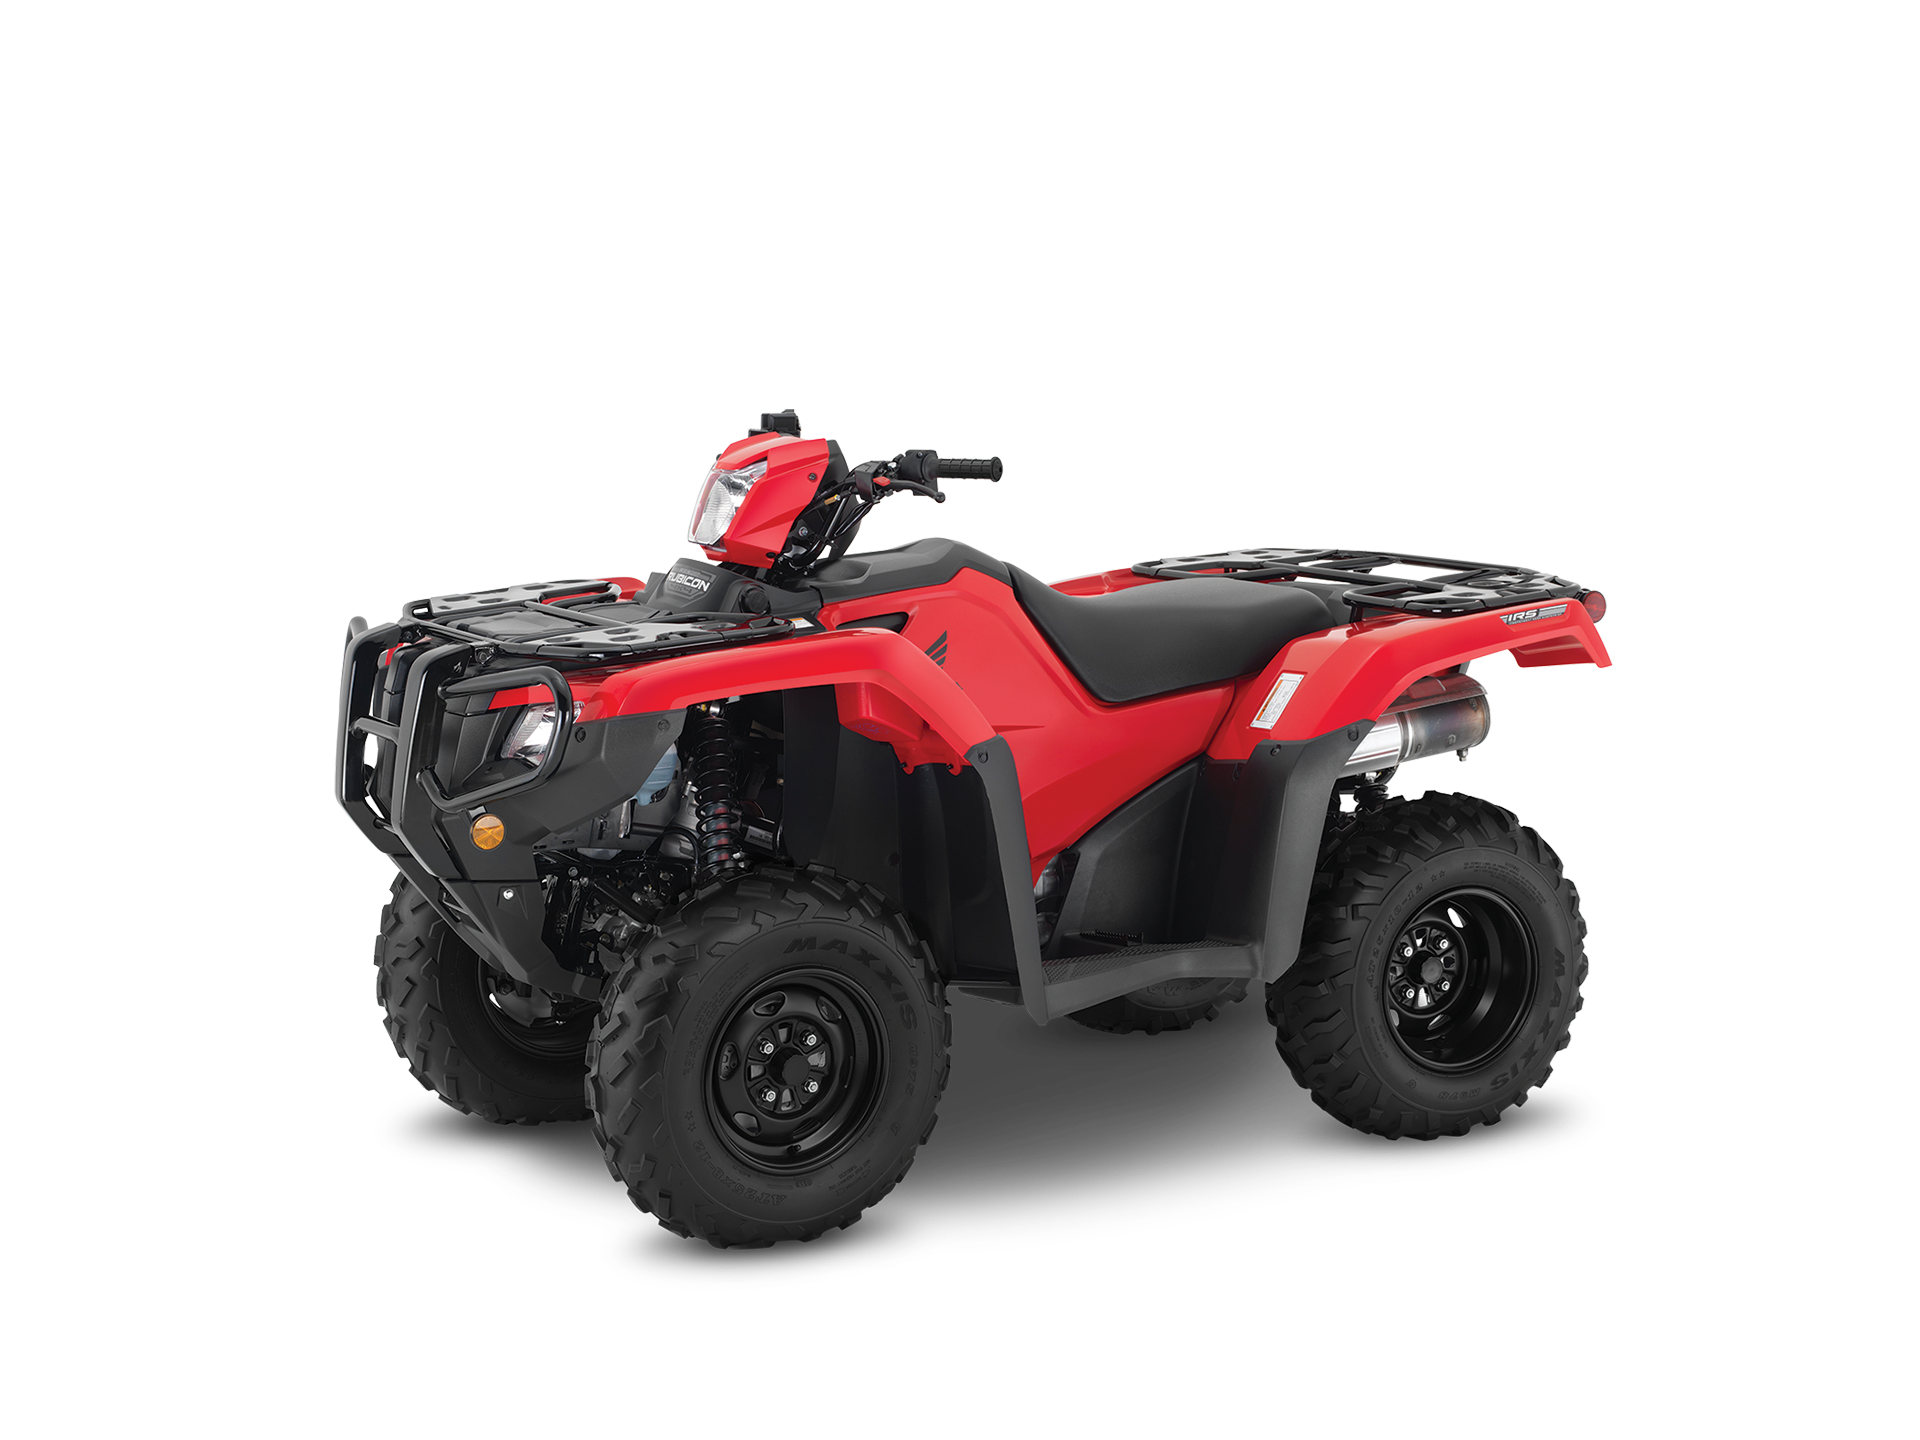 Rouge patriote Rubicon 520 IRS EPS